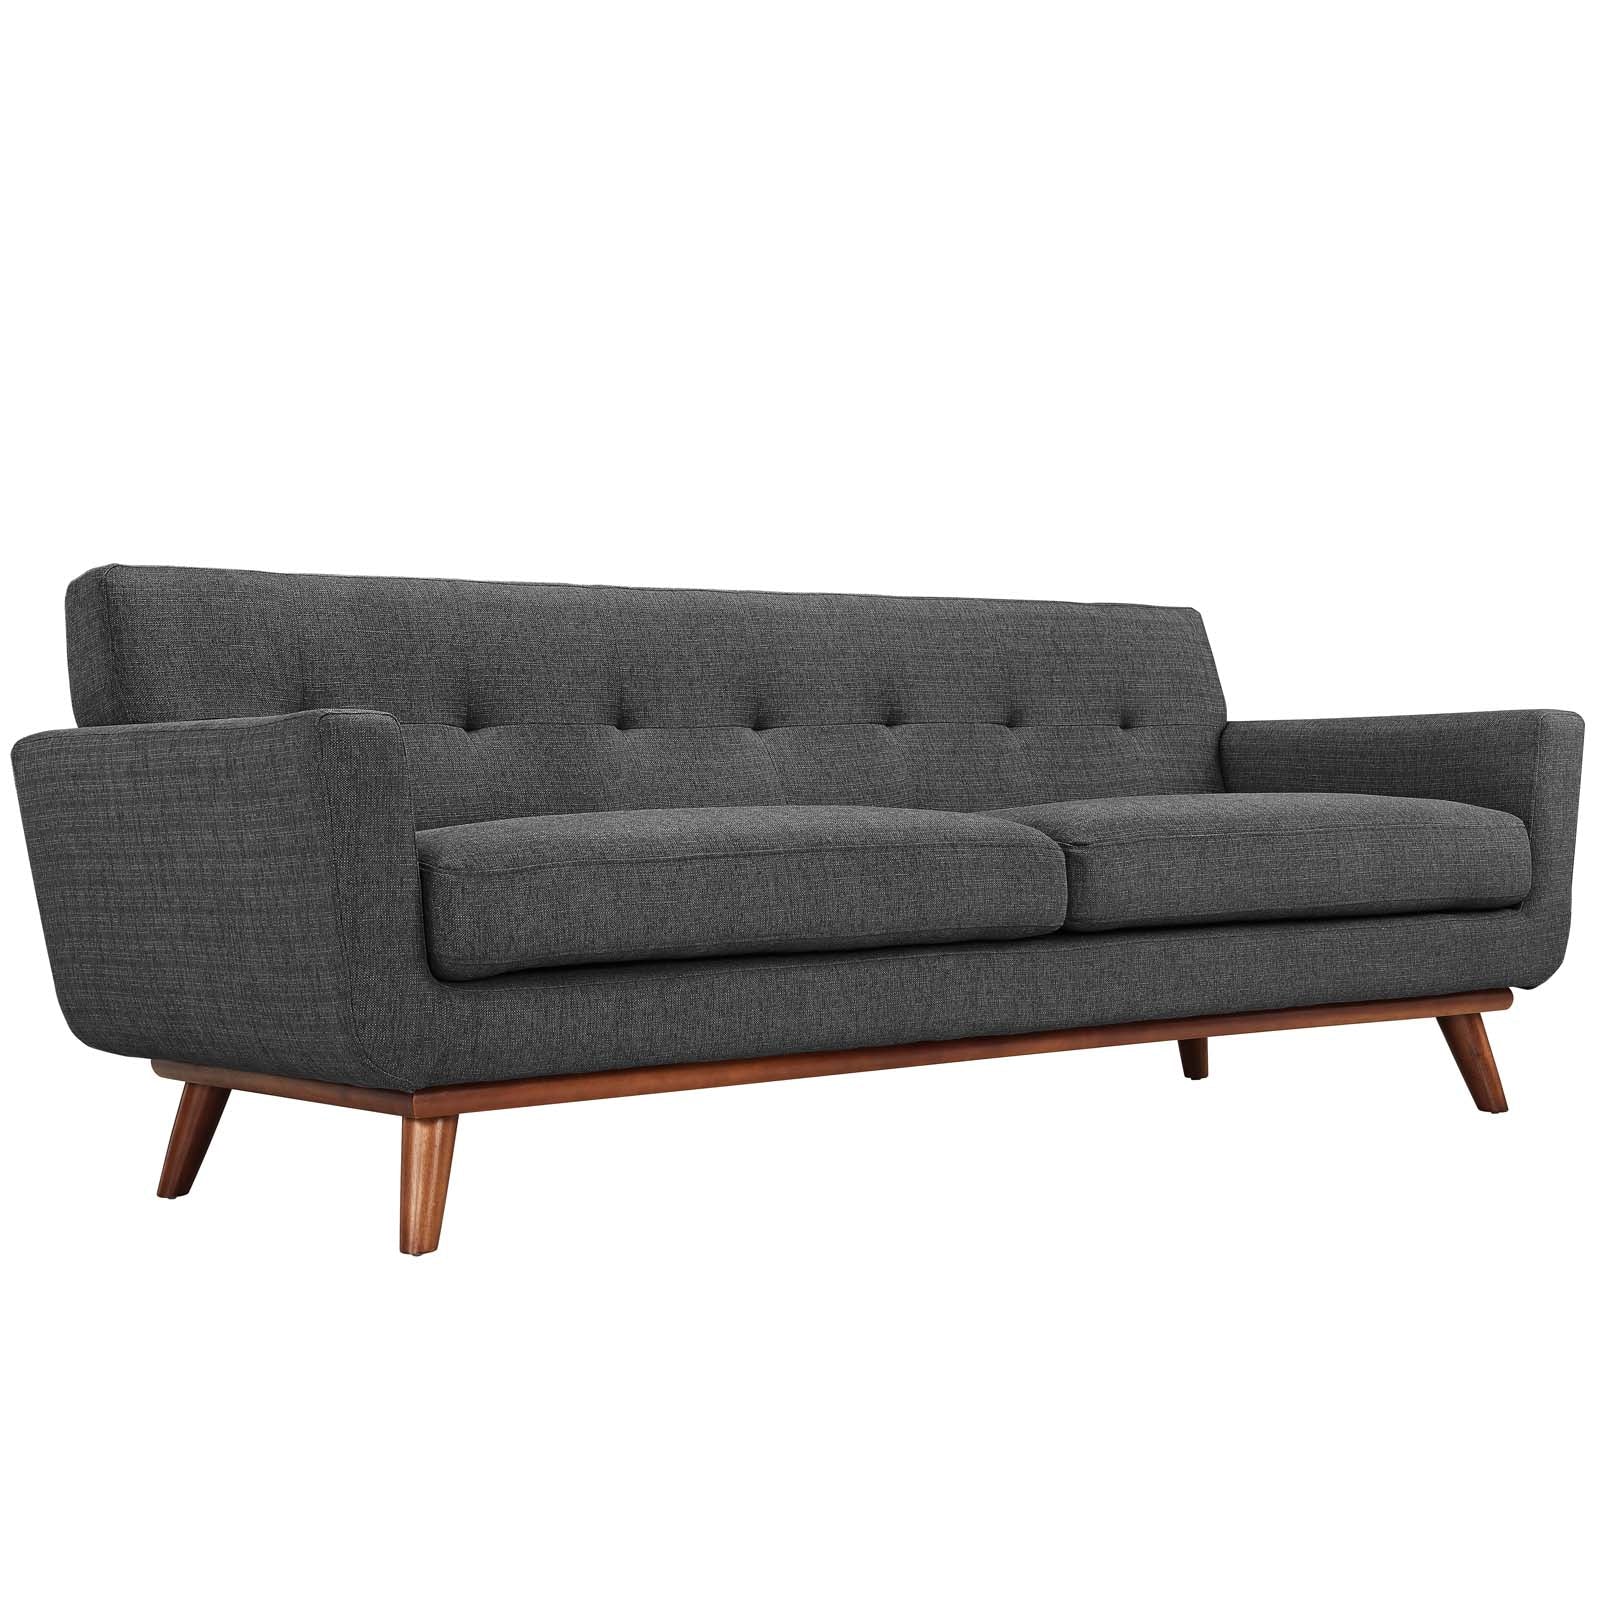 Modway Sofas & Couches - Engage Upholstered Fabric Sofa Gray